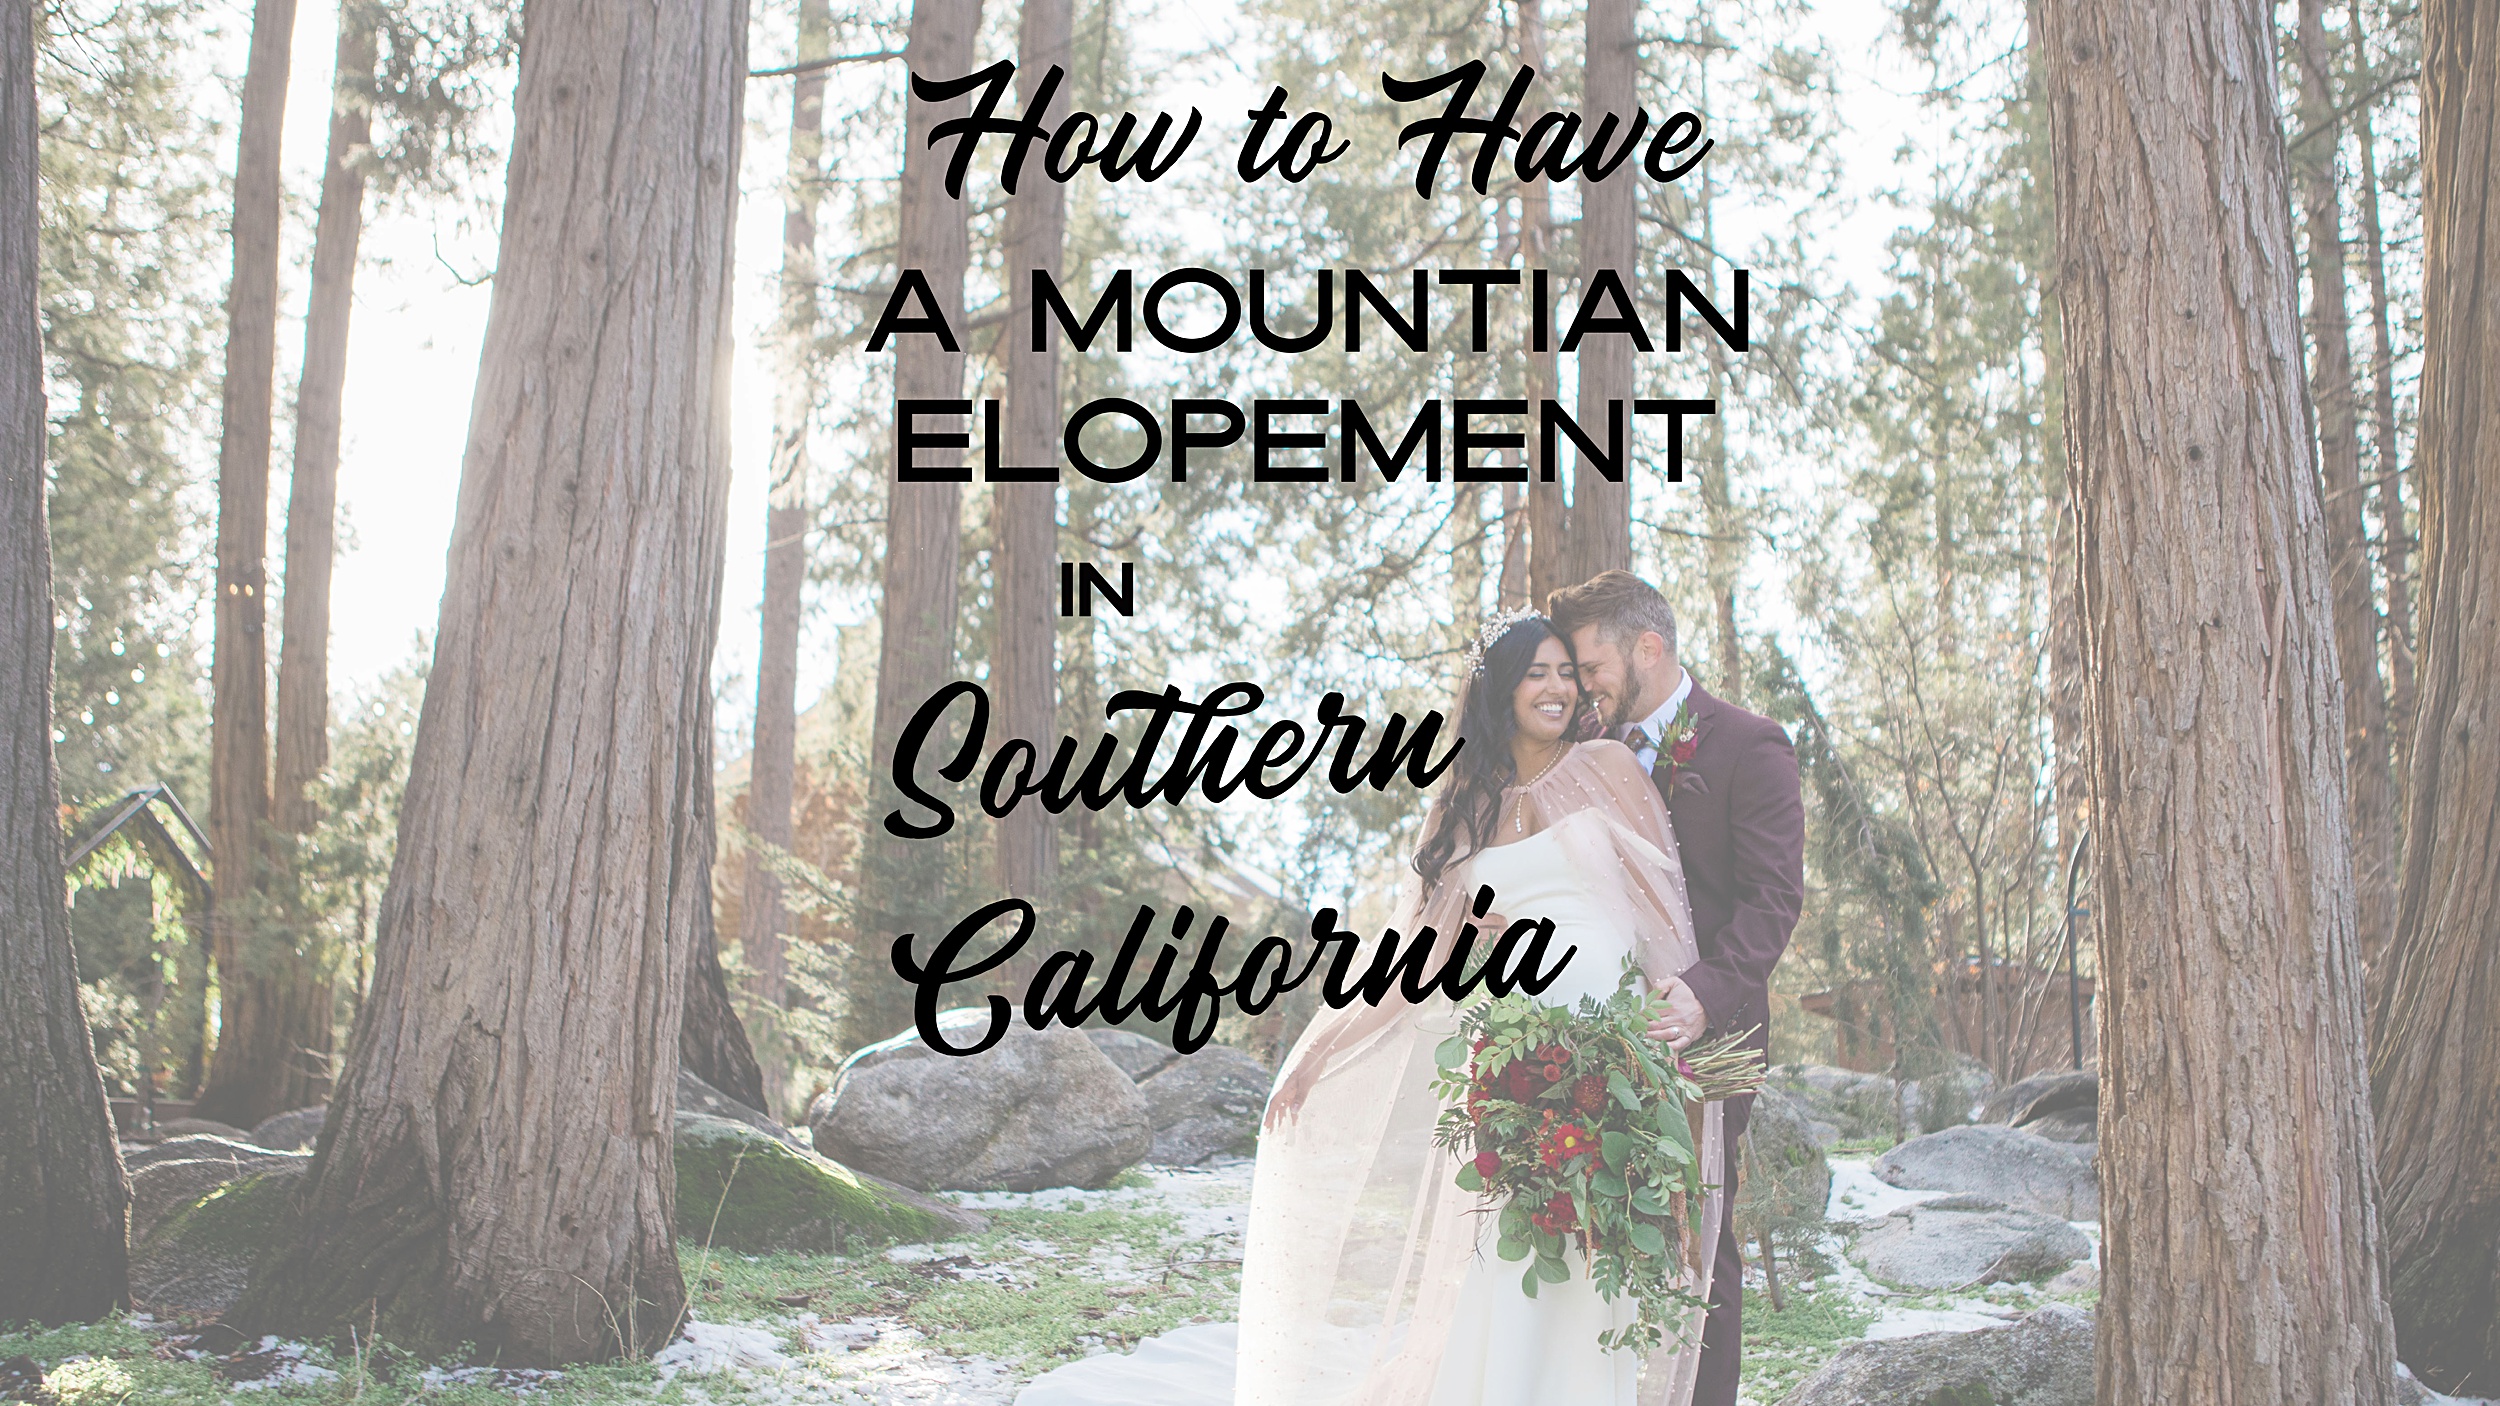 How-to-have-a-mt-elopement-in-s-cal How to Have a Mountain Elopement in Idyllwild California